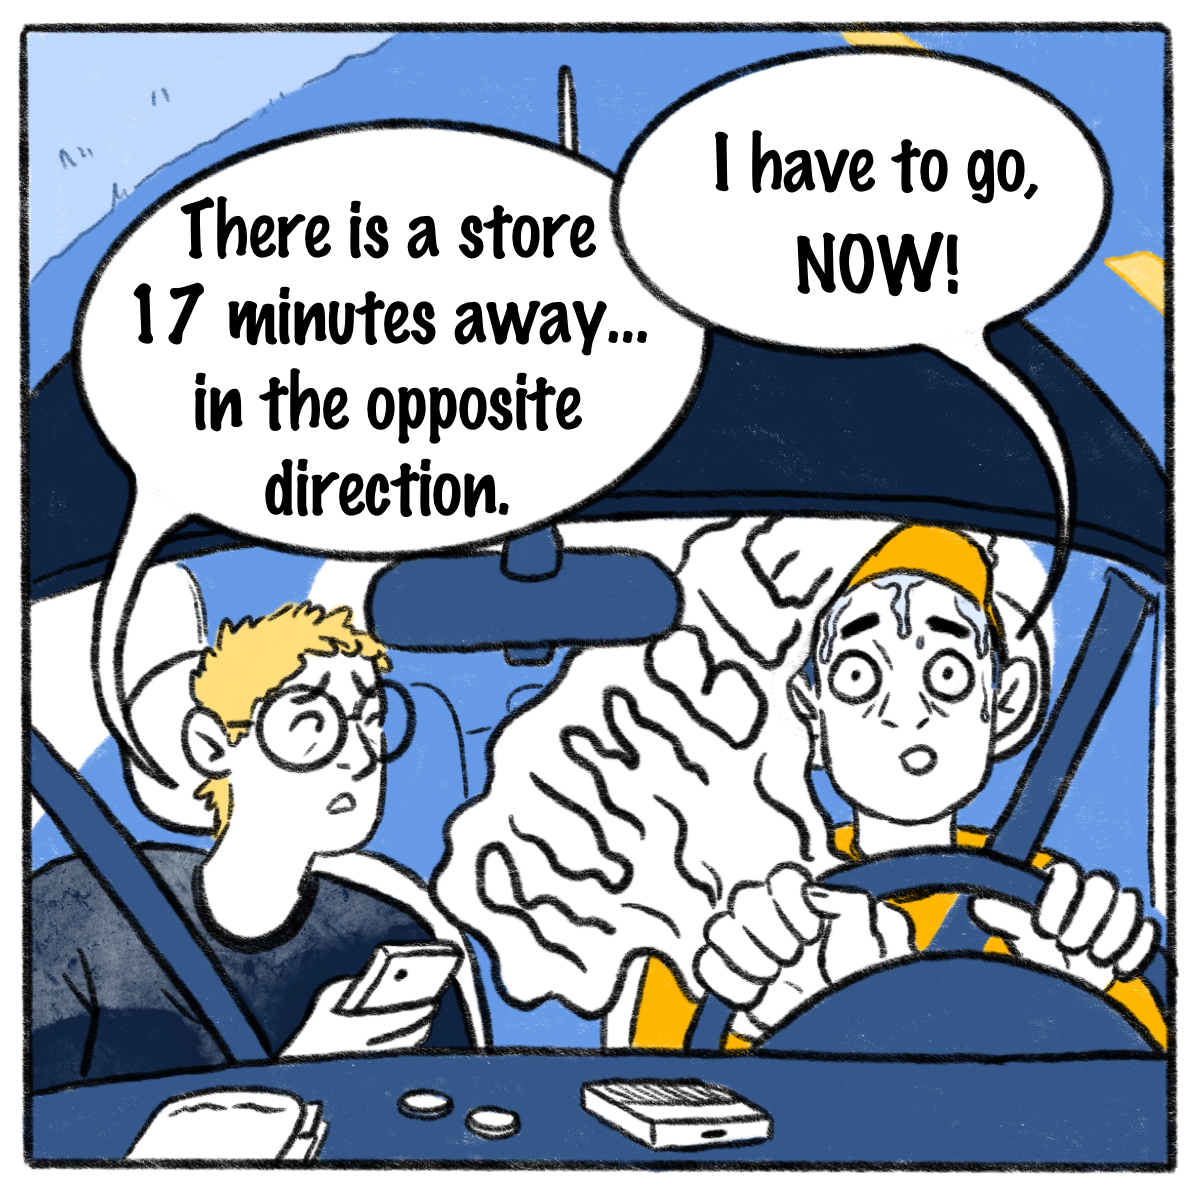 Two people are in a car, the man is sweating and a rumble comes from his stomach, the woman checks her phone, a speech bubble from his mouth says "I have to go, NOW!" and a speech bubble from her mouth says "There is a store 17 minutes away... in the opposite direction"